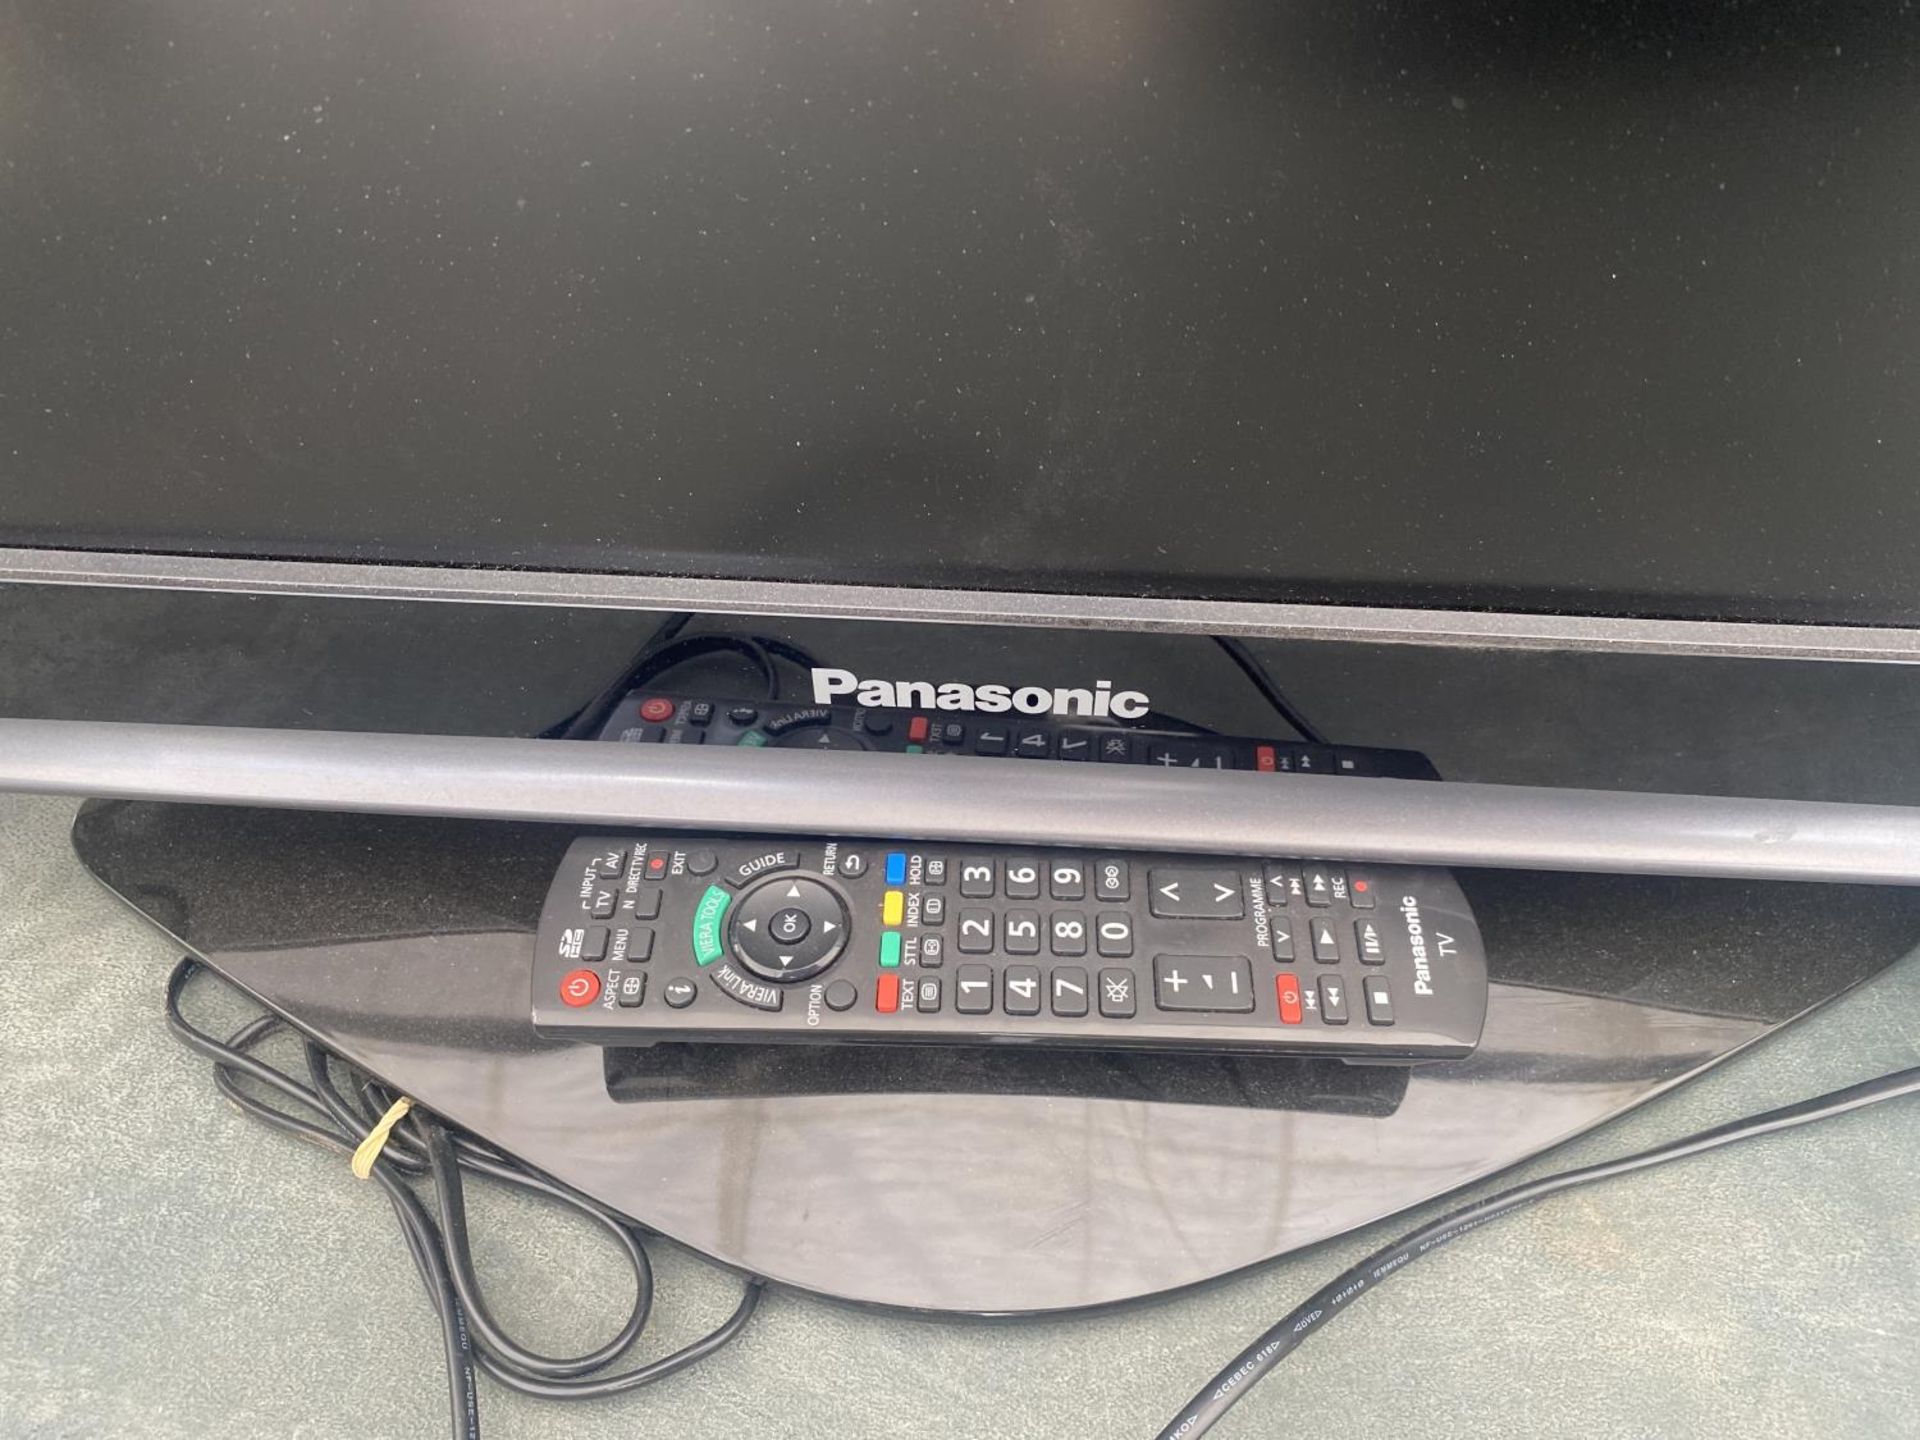 A 37" PANASONIC TELEVISION WITH REMOTE CONTROL BELIEVED IN WORKING ORDER BUT NO WARRANTY - Image 2 of 4